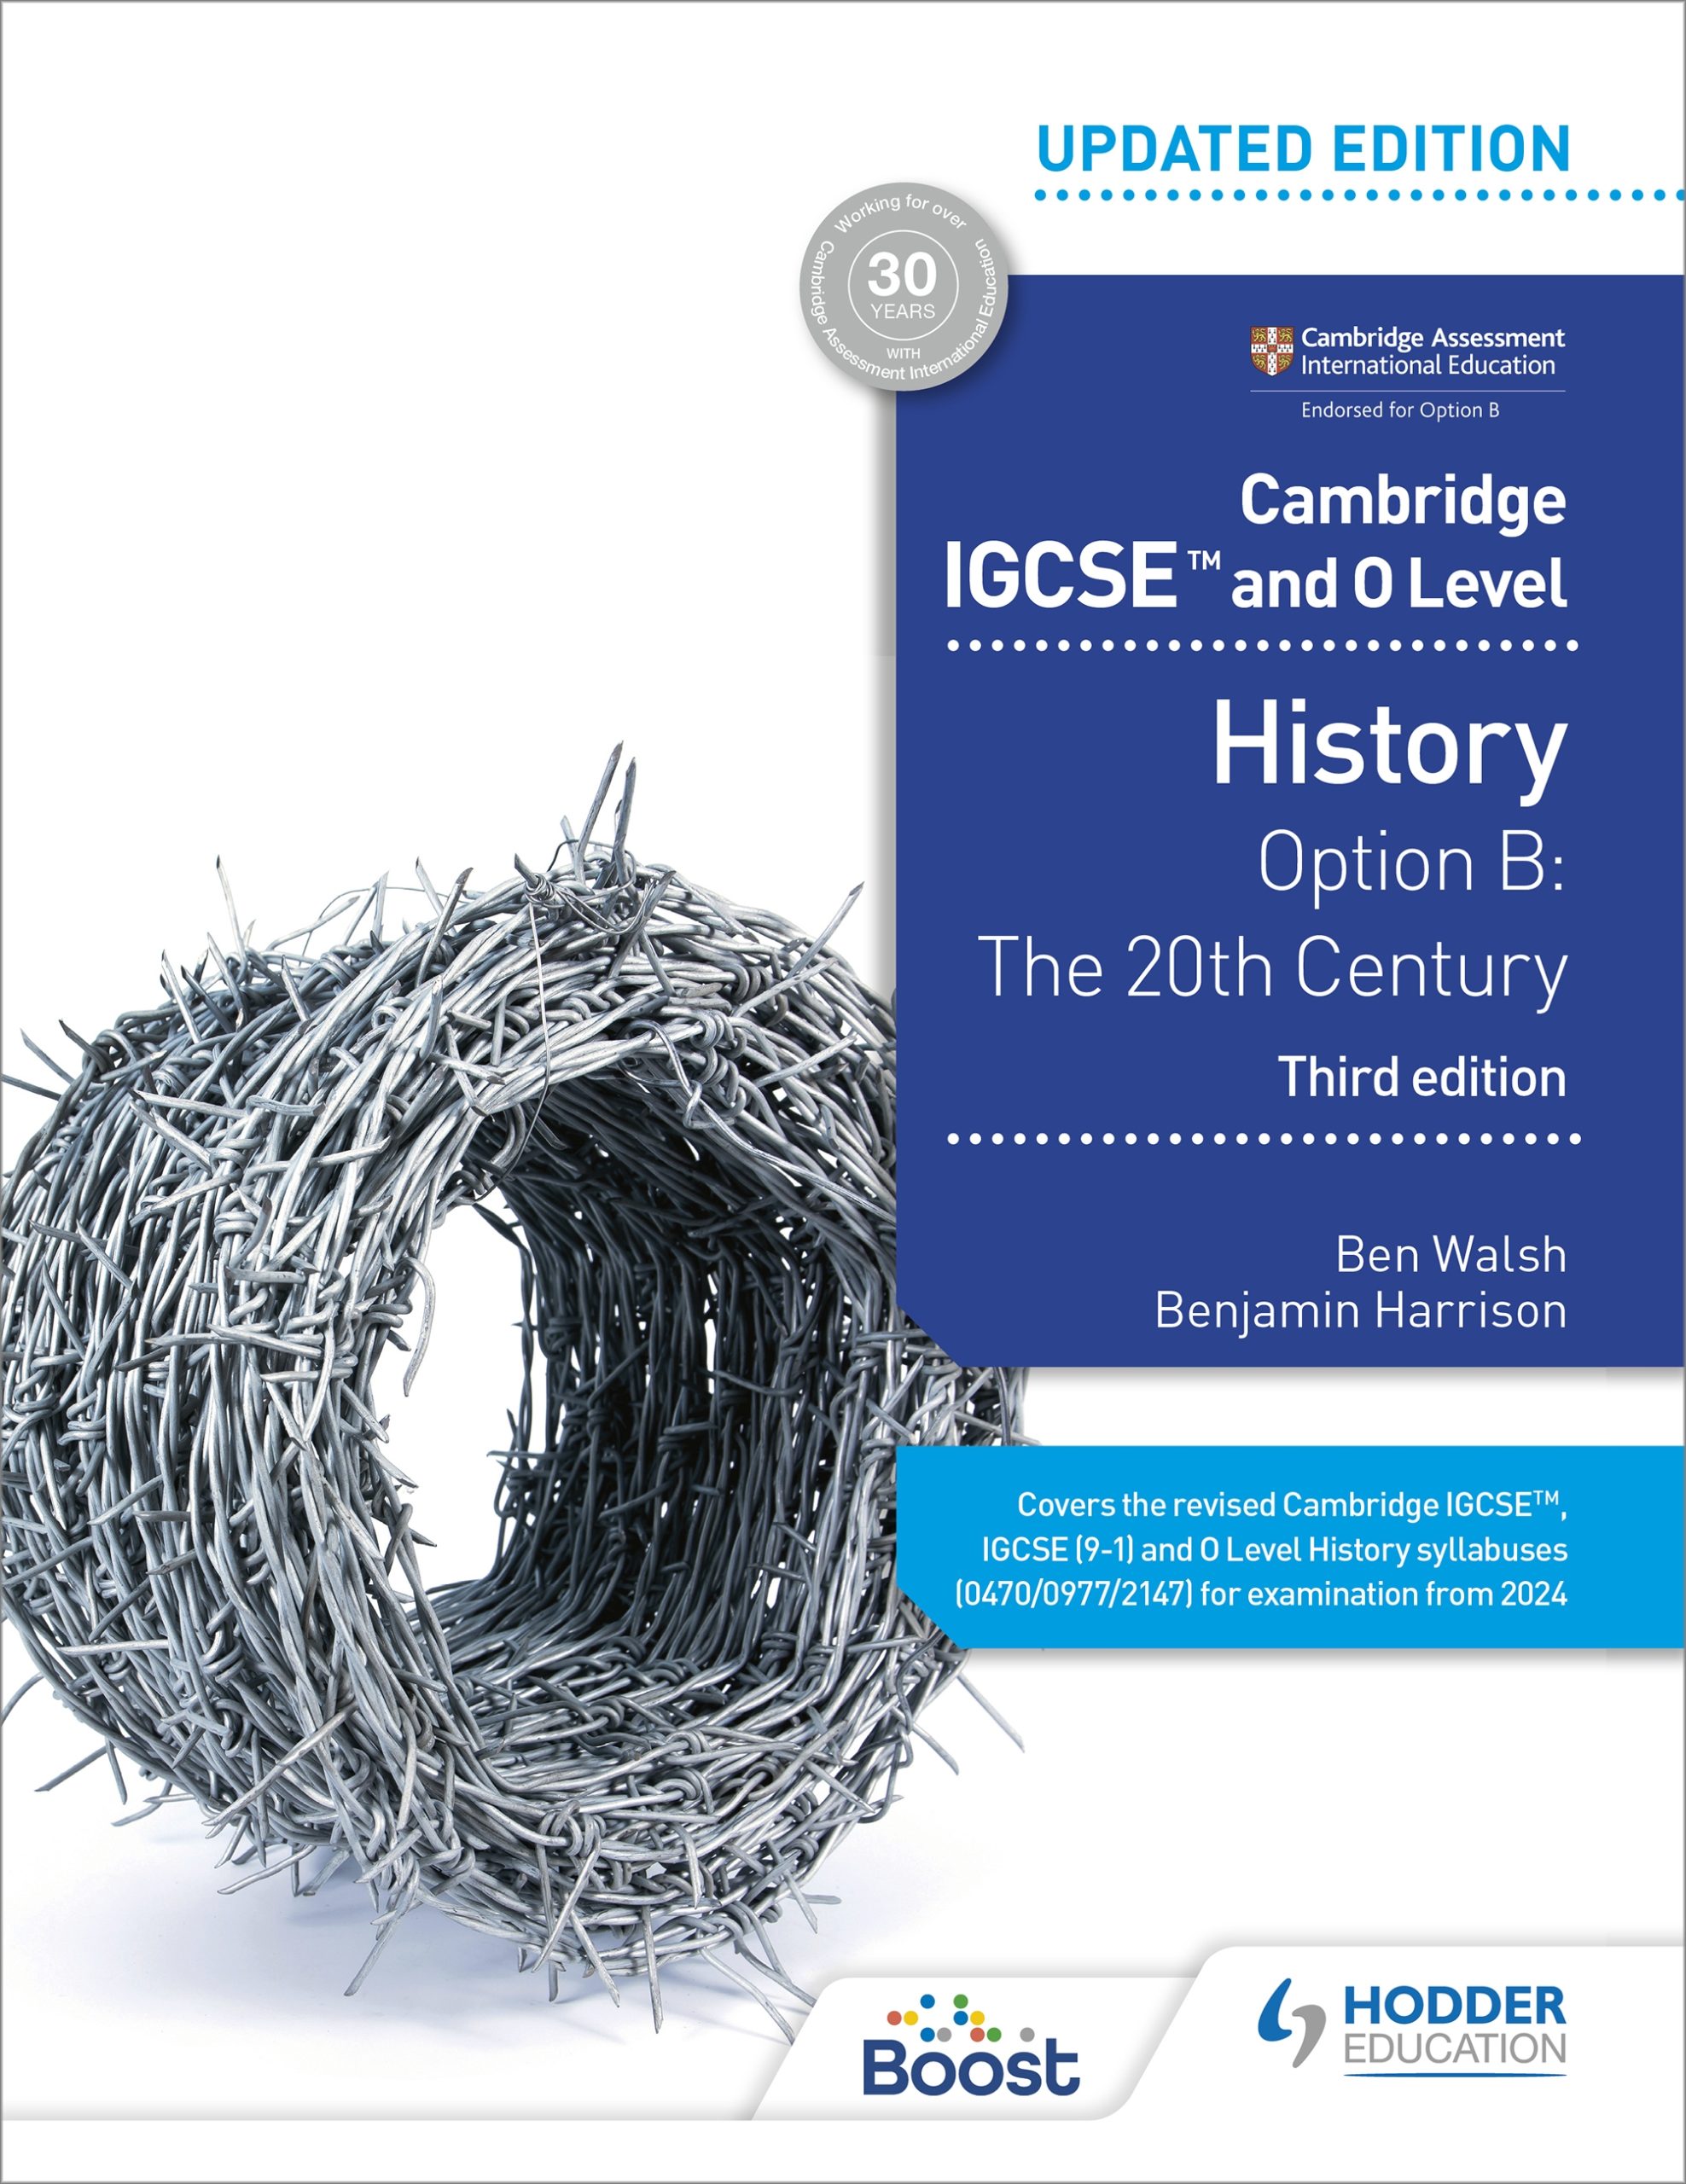 Featured image for “Cambridge IGCSE and O Level History 3rd Edition: Option B: The 20th century”